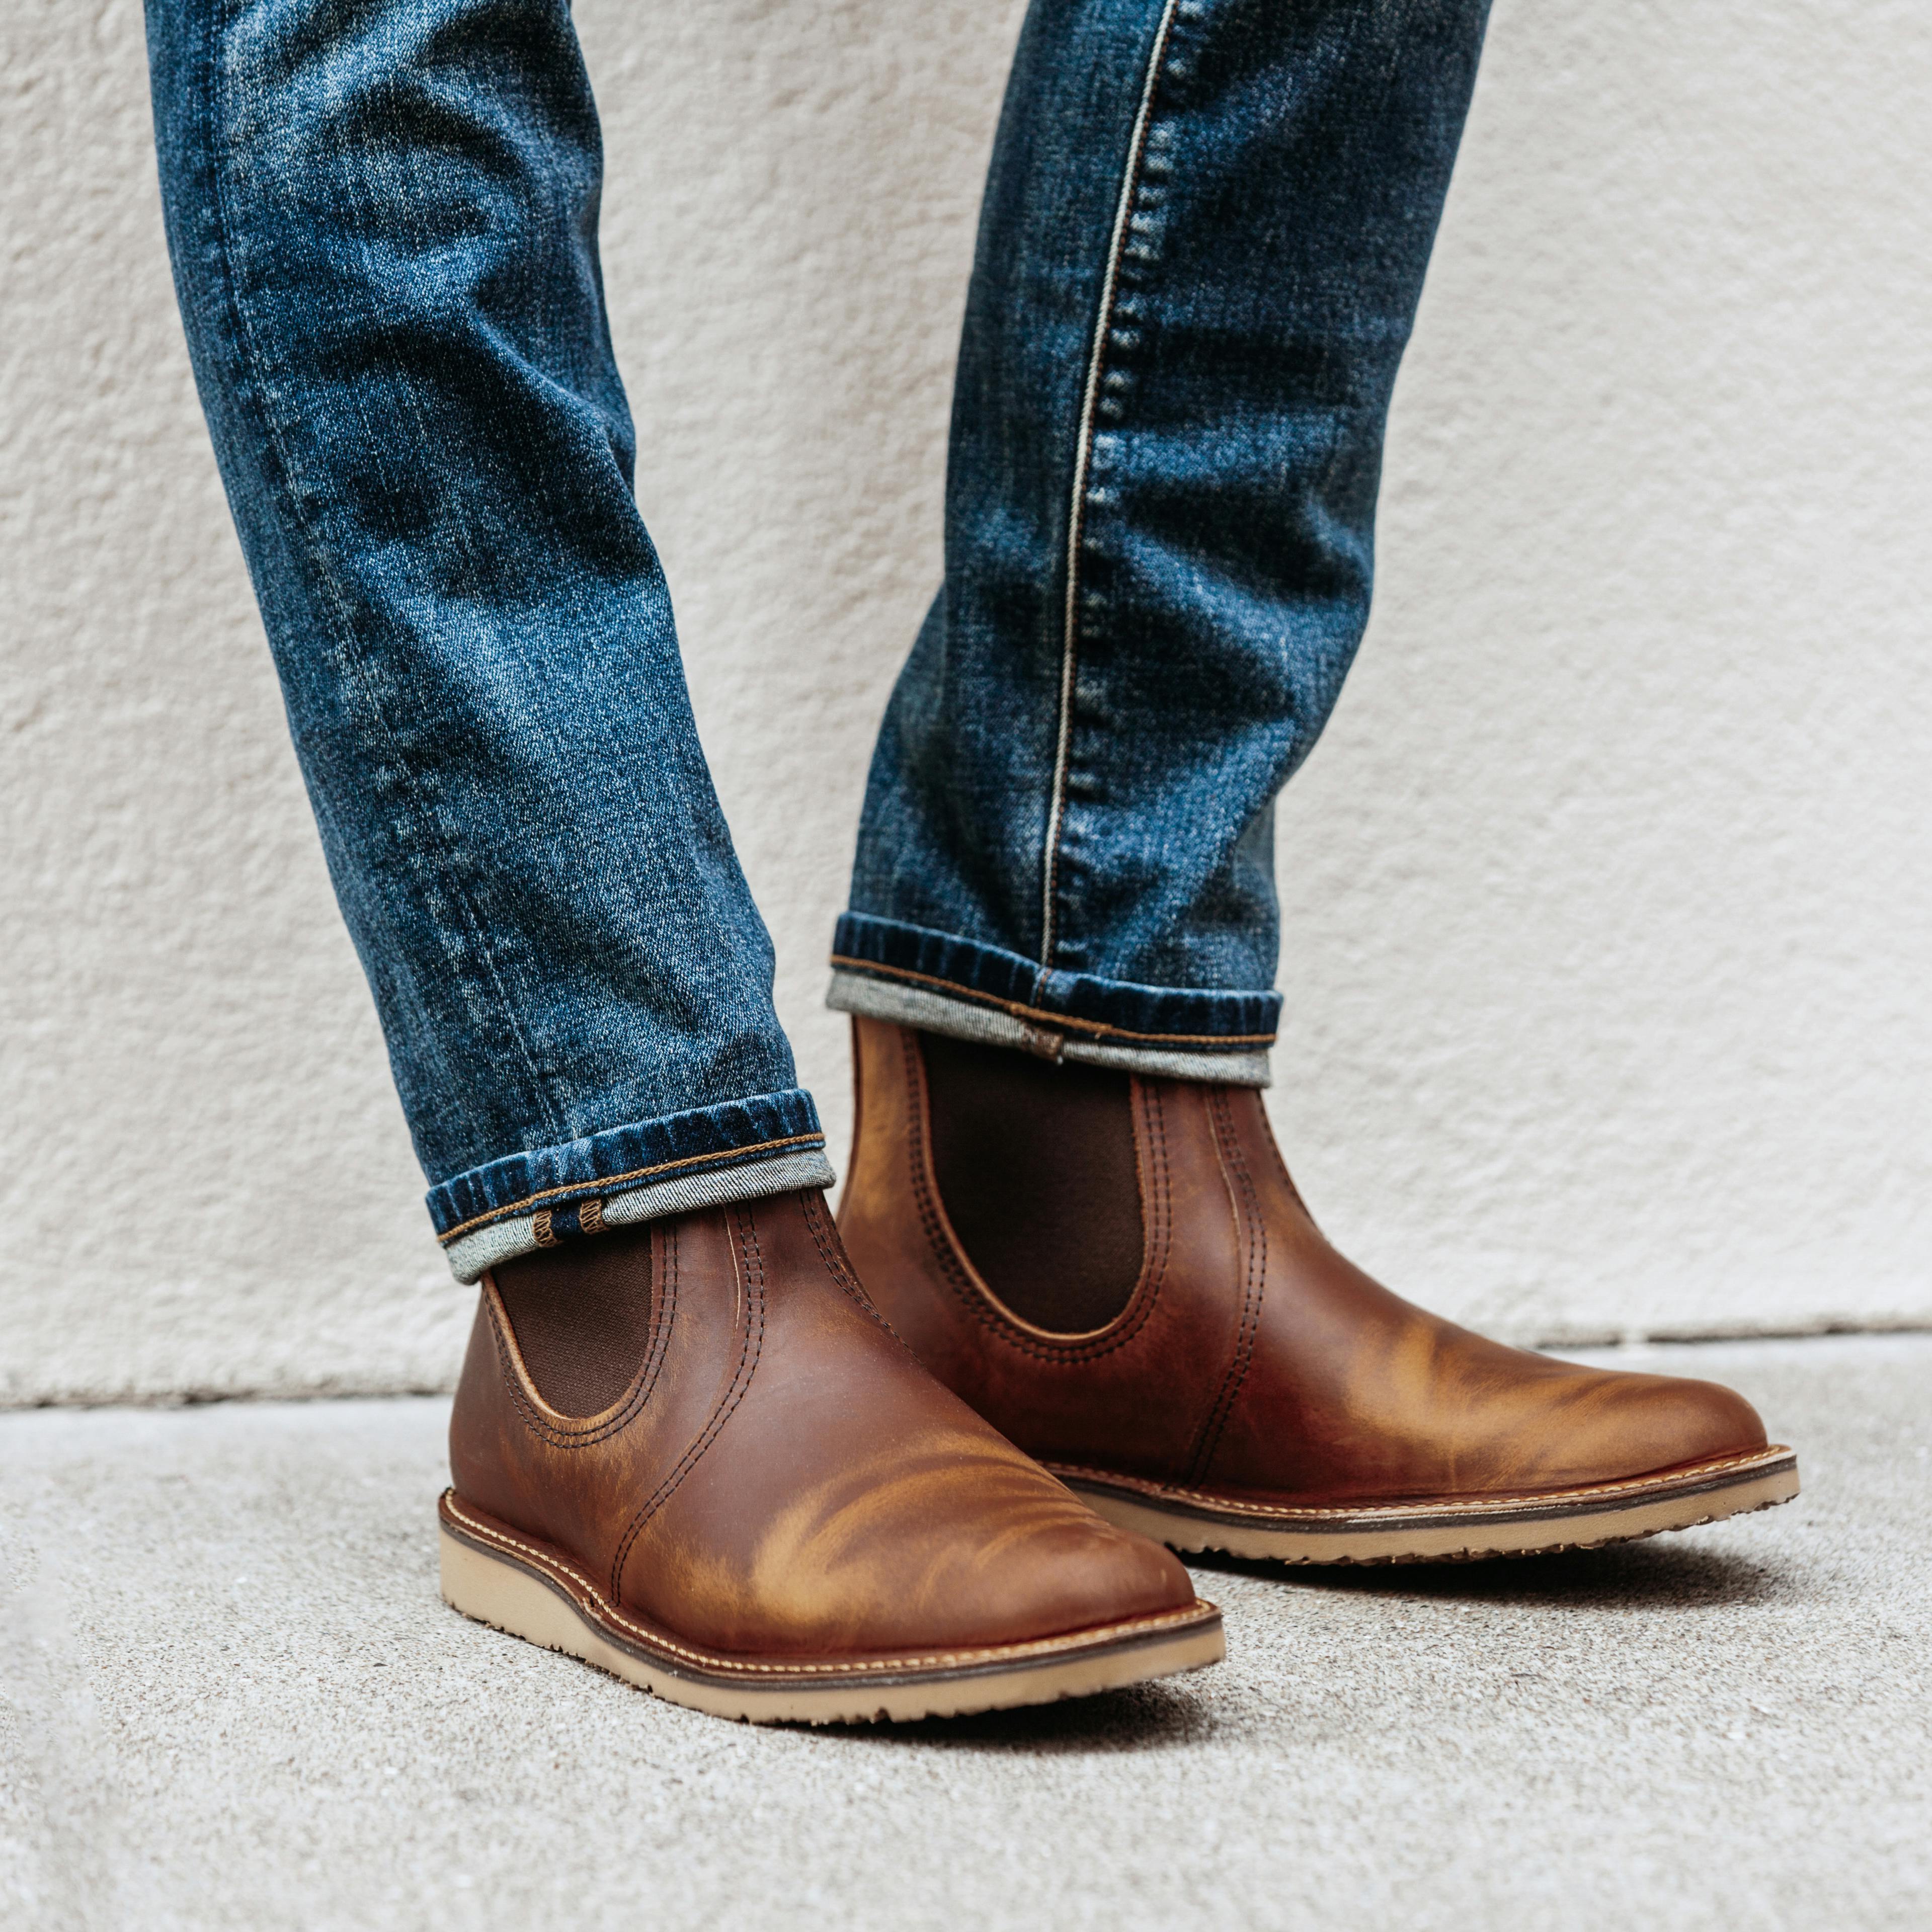 Red Wing Heritage Chelsea Boots - Rough and Tough | Chelsea Boots | Huckberry